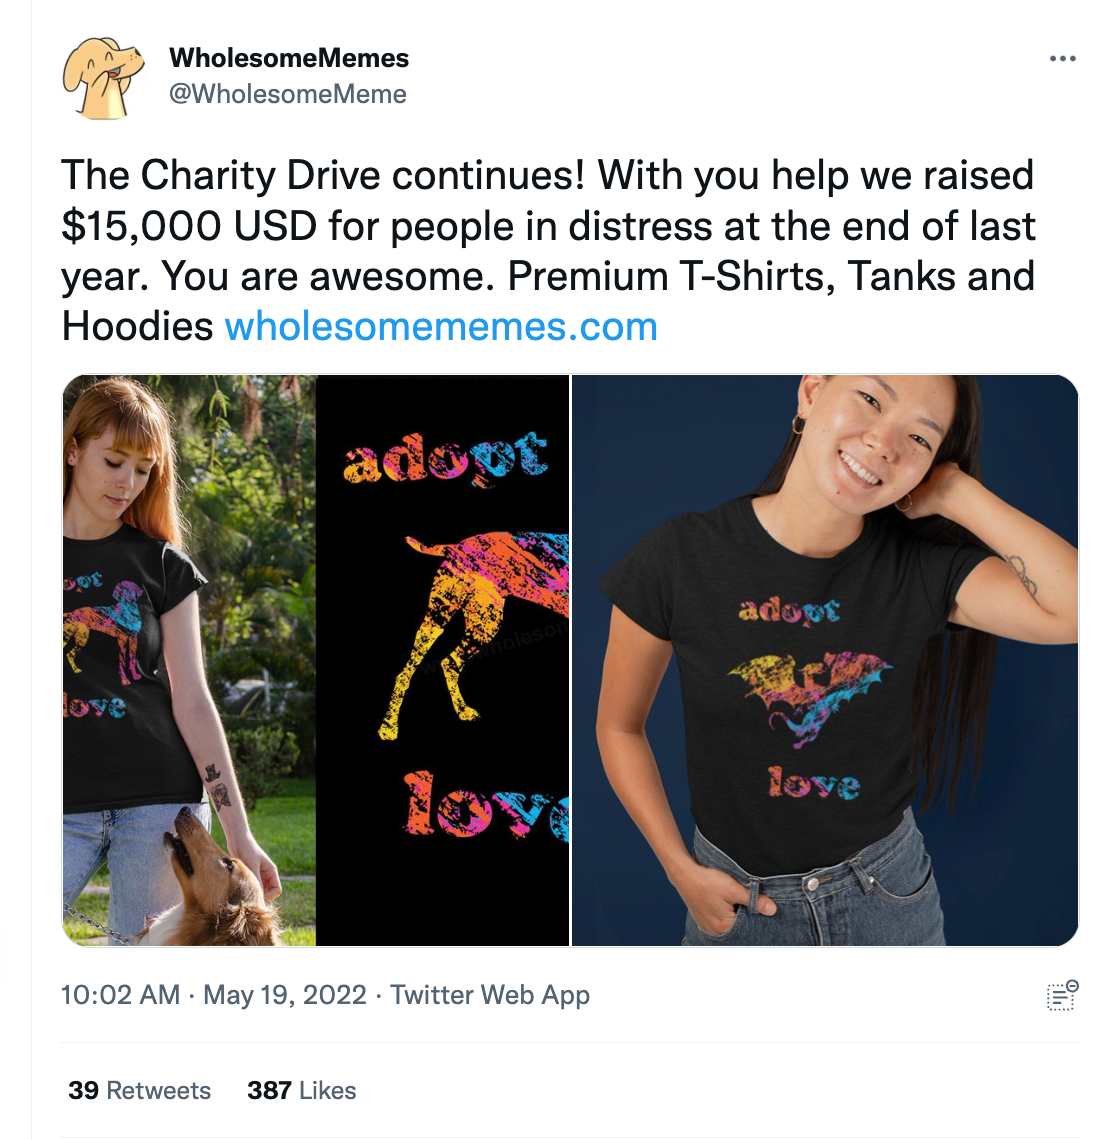 Shopify; Sell On Twitter, Direct From Shopify. A tweet from WholesomeMemes promoting its Adopt Love t-shirts as part of a charity campaign raising $15,000 for people in distress during the pandemic.